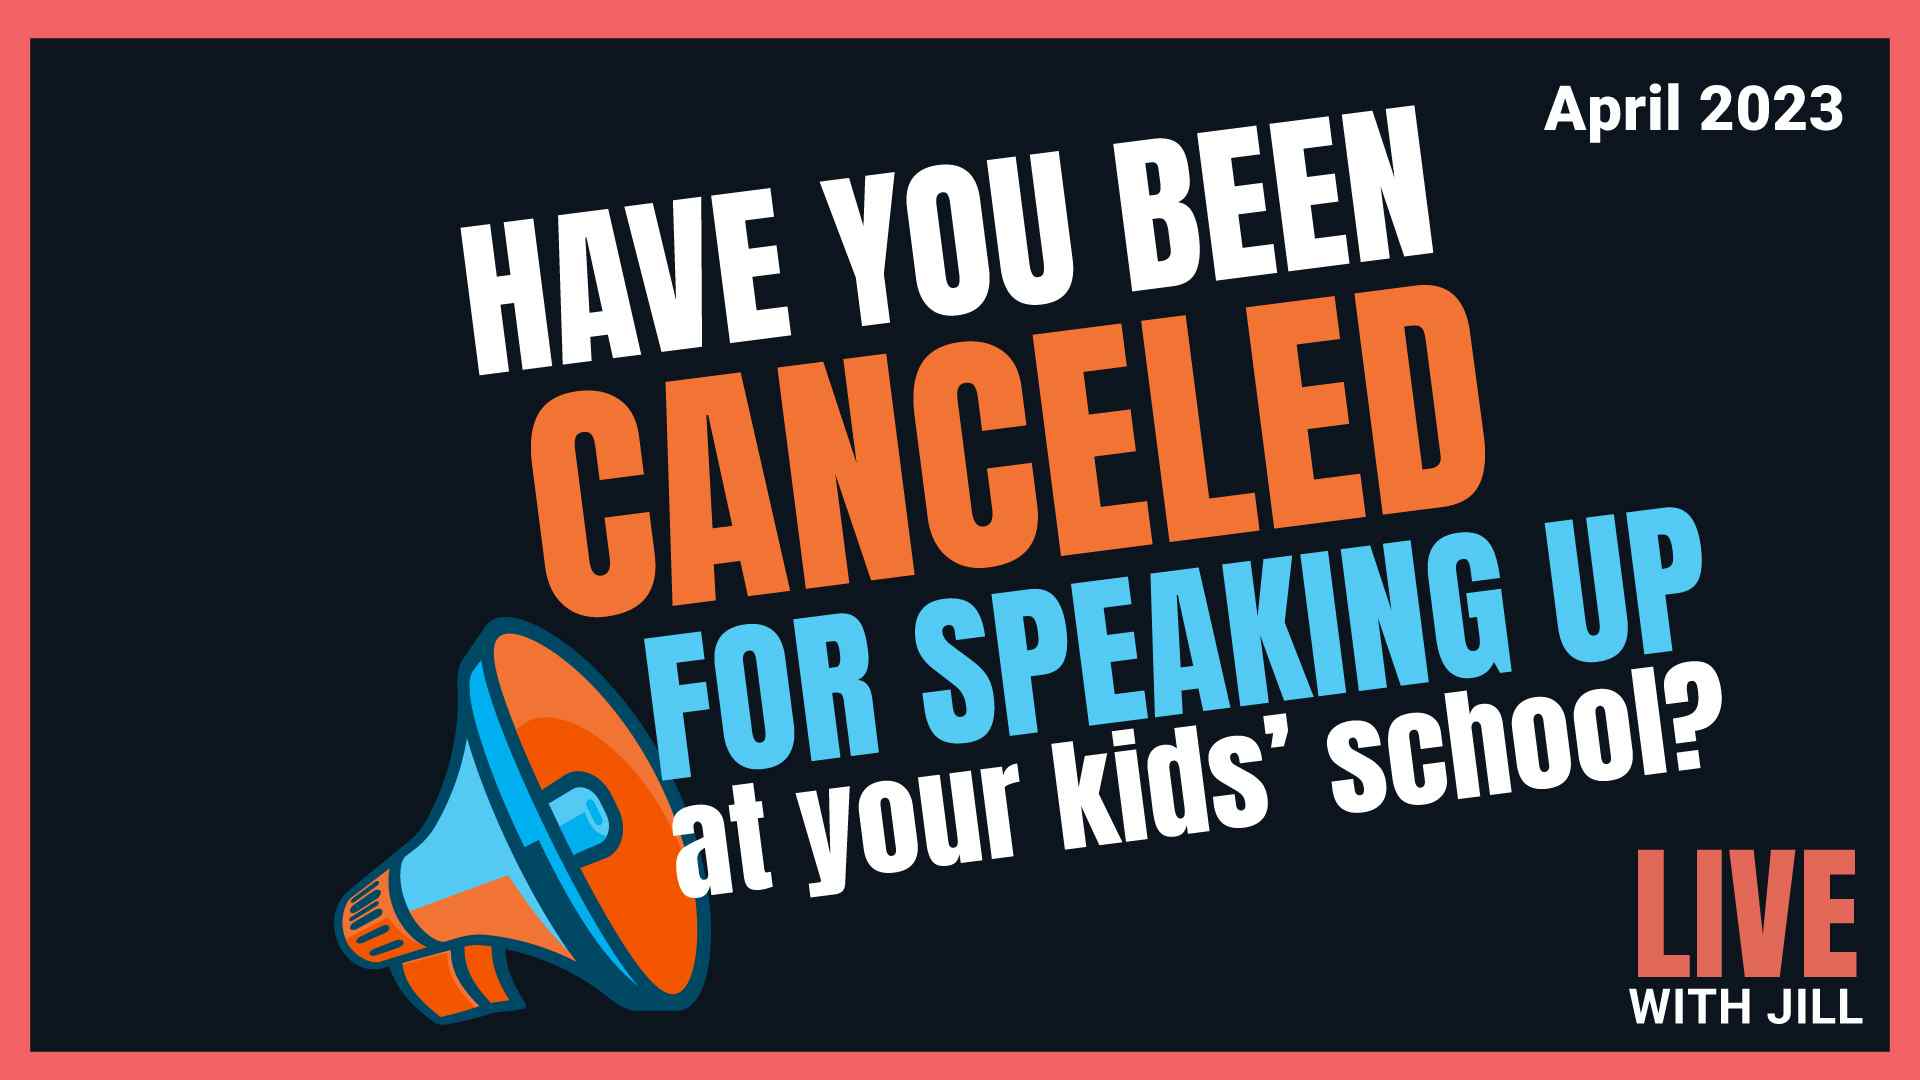 Have You Been Canceled for Speaking up at Your Kids’ School?